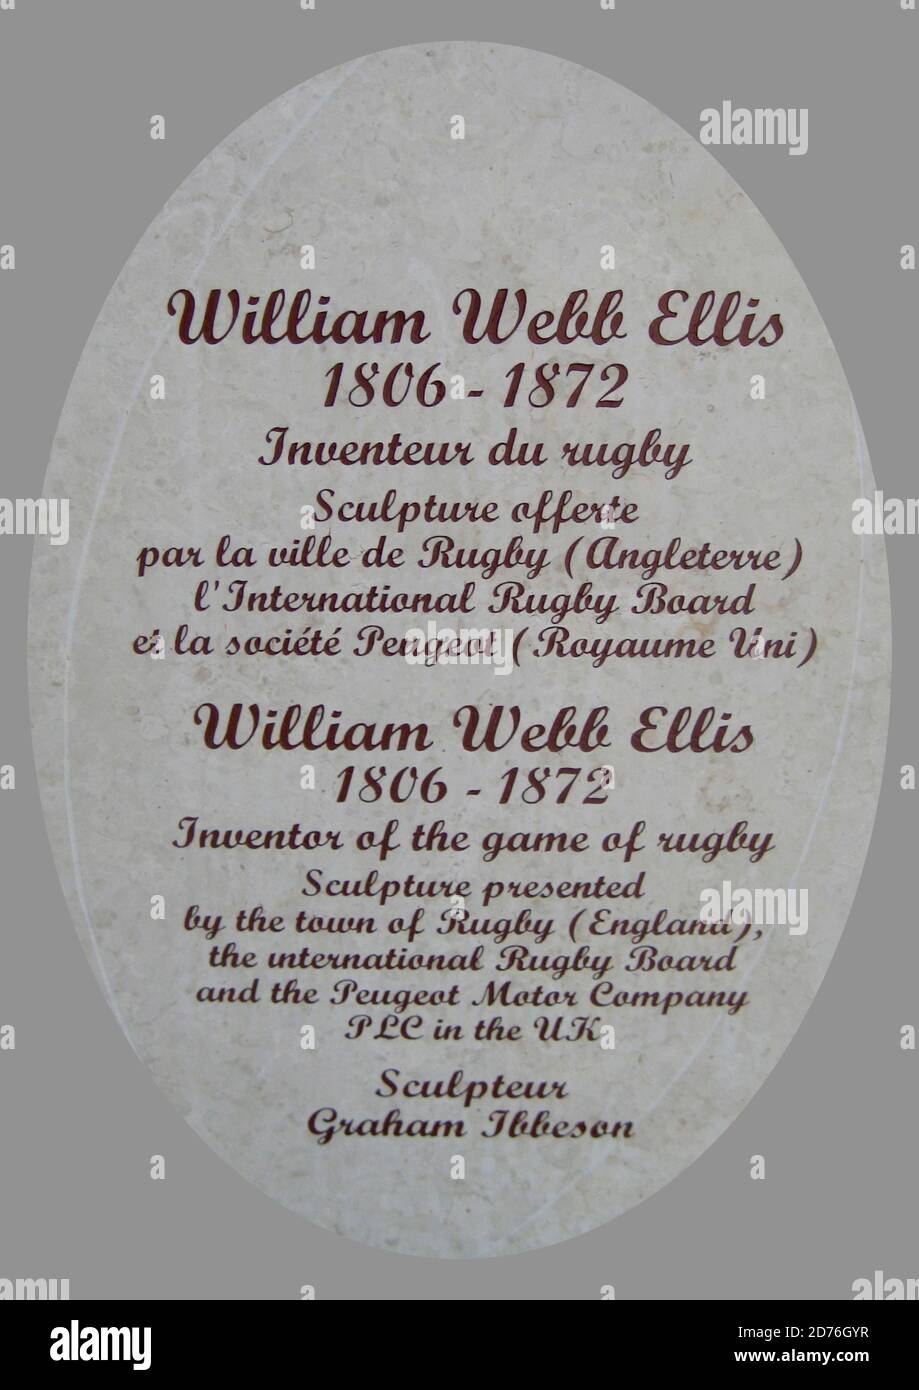 Tribute to William Webb Ellis founder of the sport of Rugby in Menton, Alpes Maritimes, France. Stock Photo